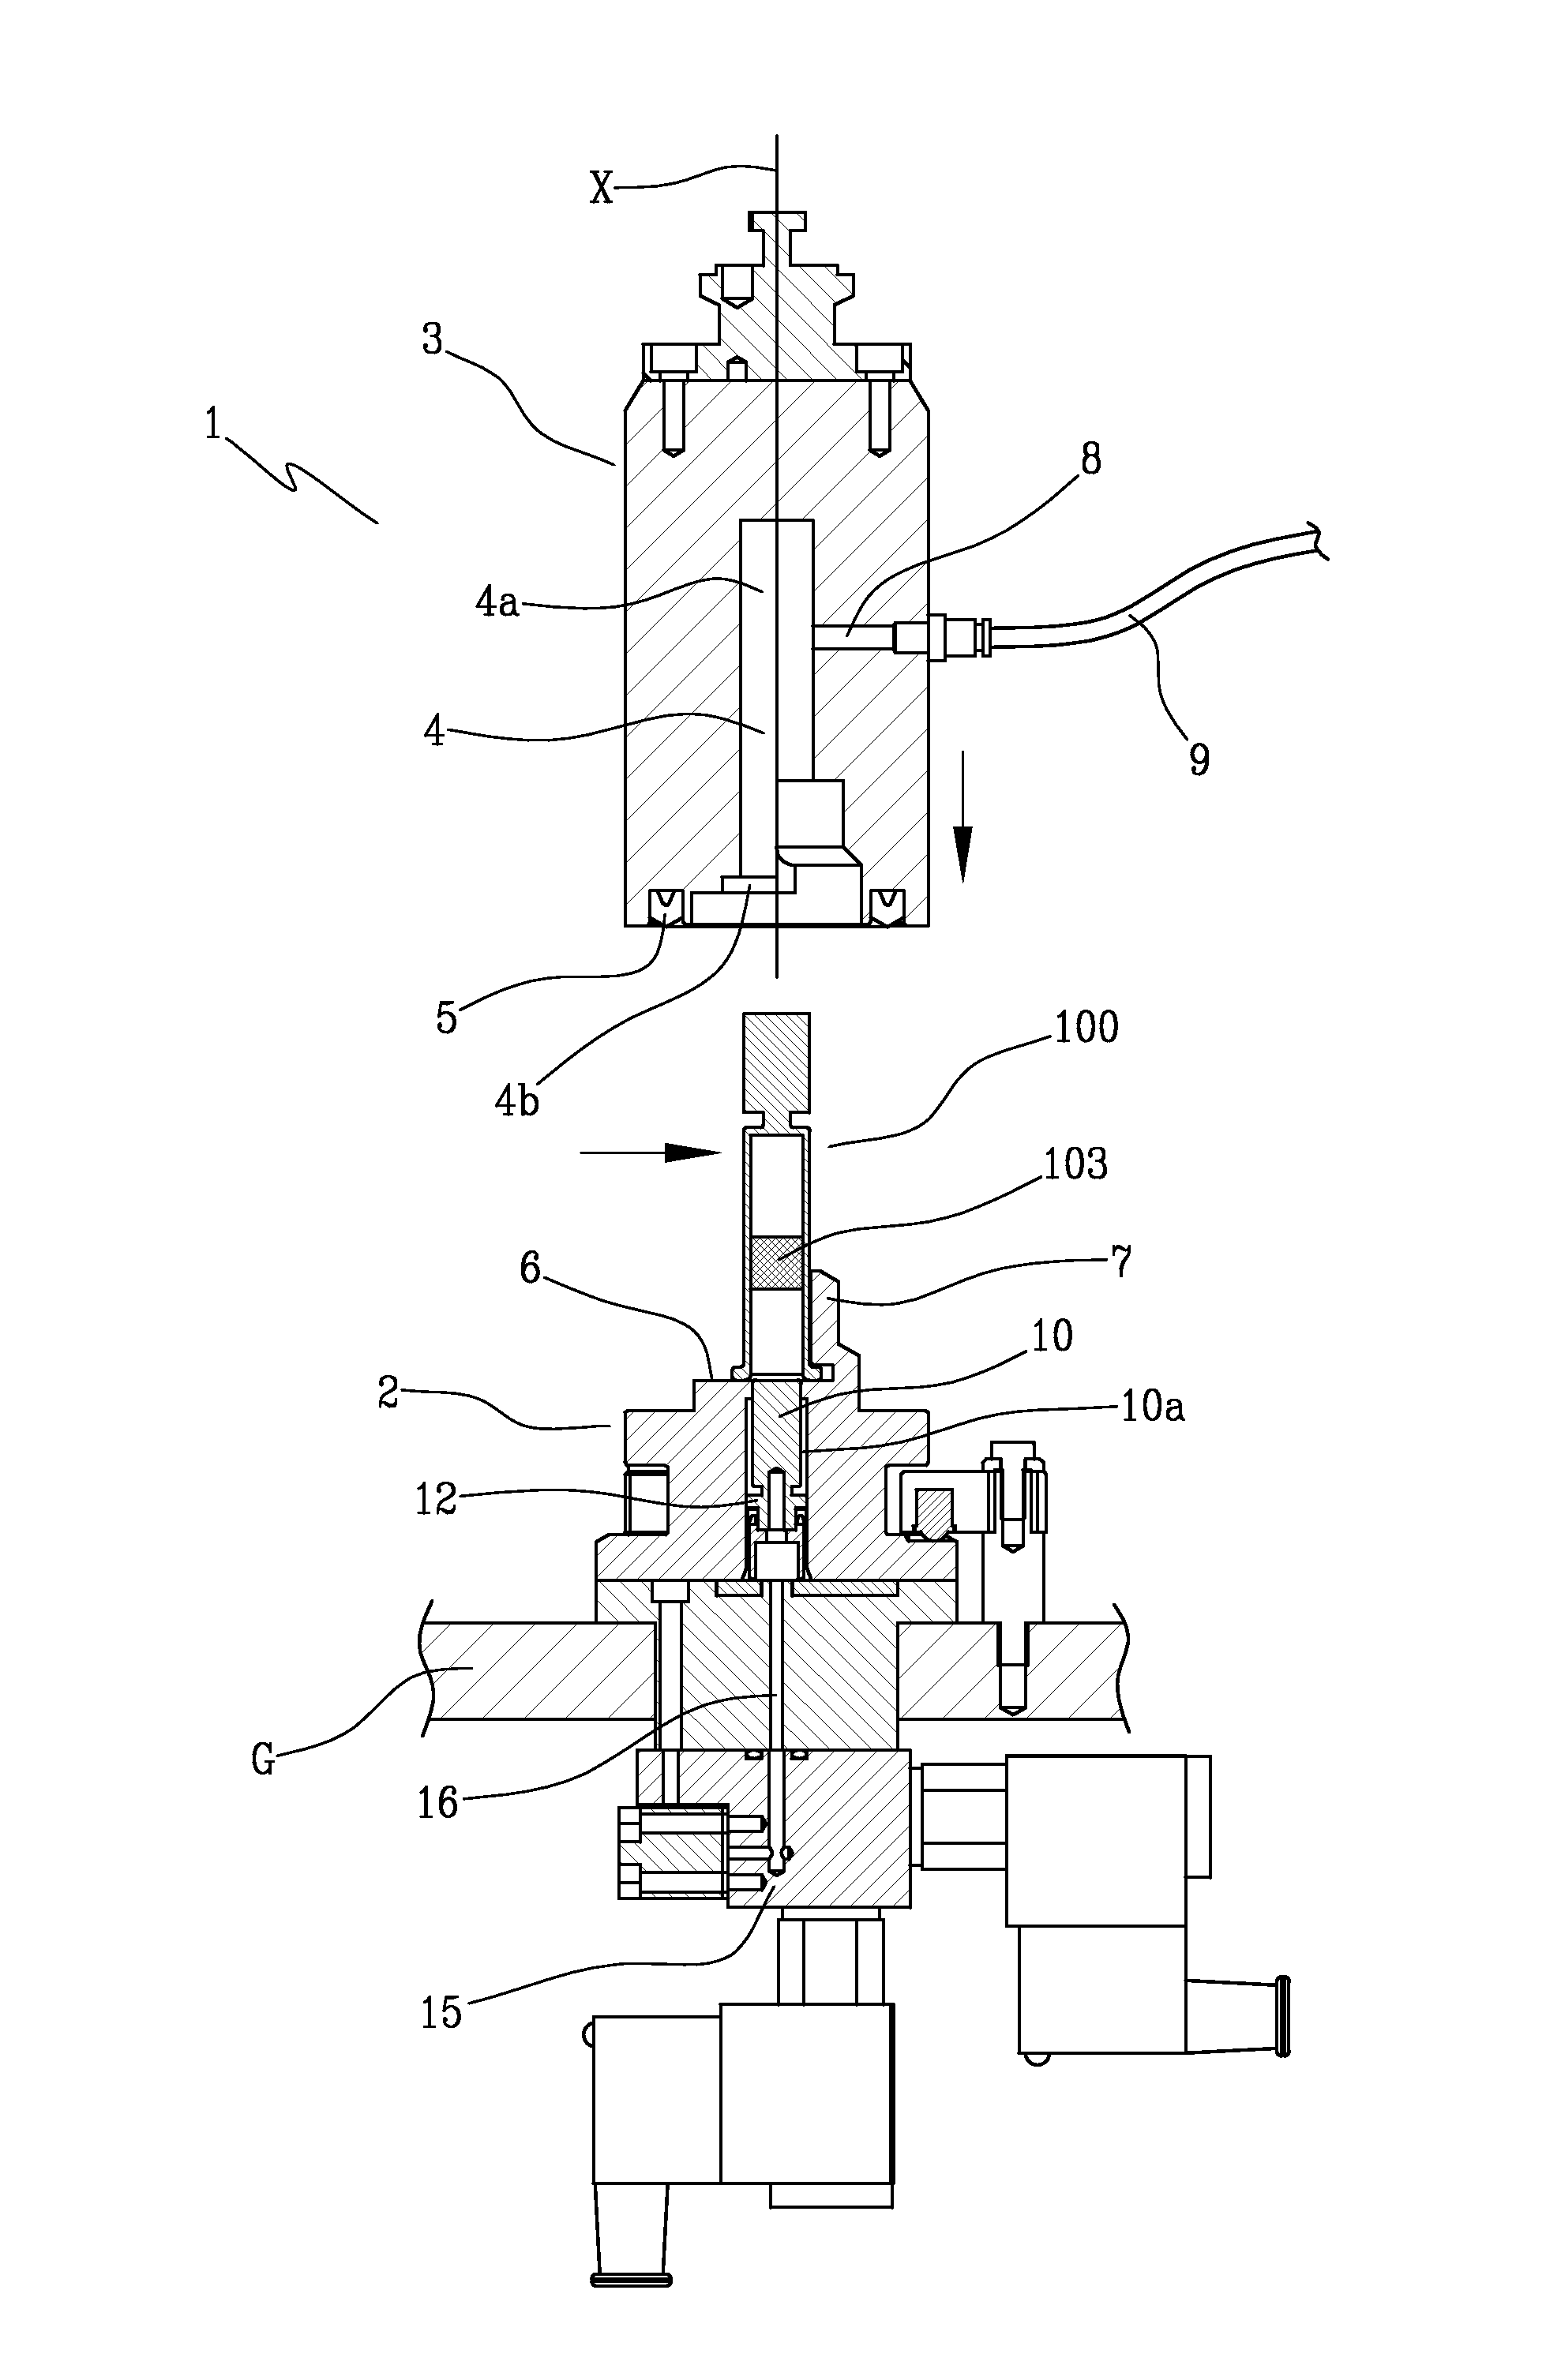 Method and apparatus for checking syringe bodies